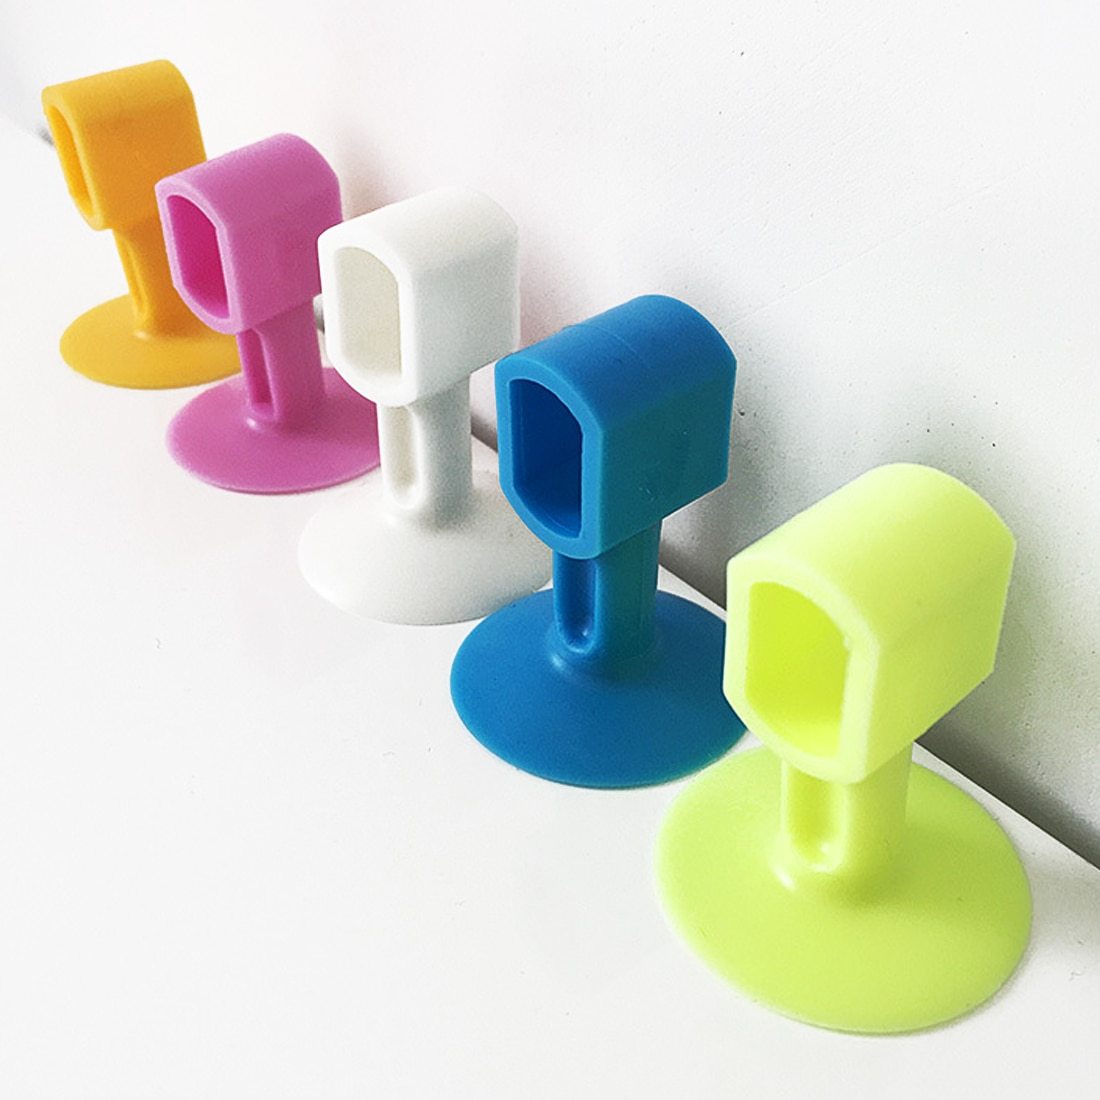 Anti-Collision Perforation Free Silicone Door Handle Stoppers - Redbovi.com